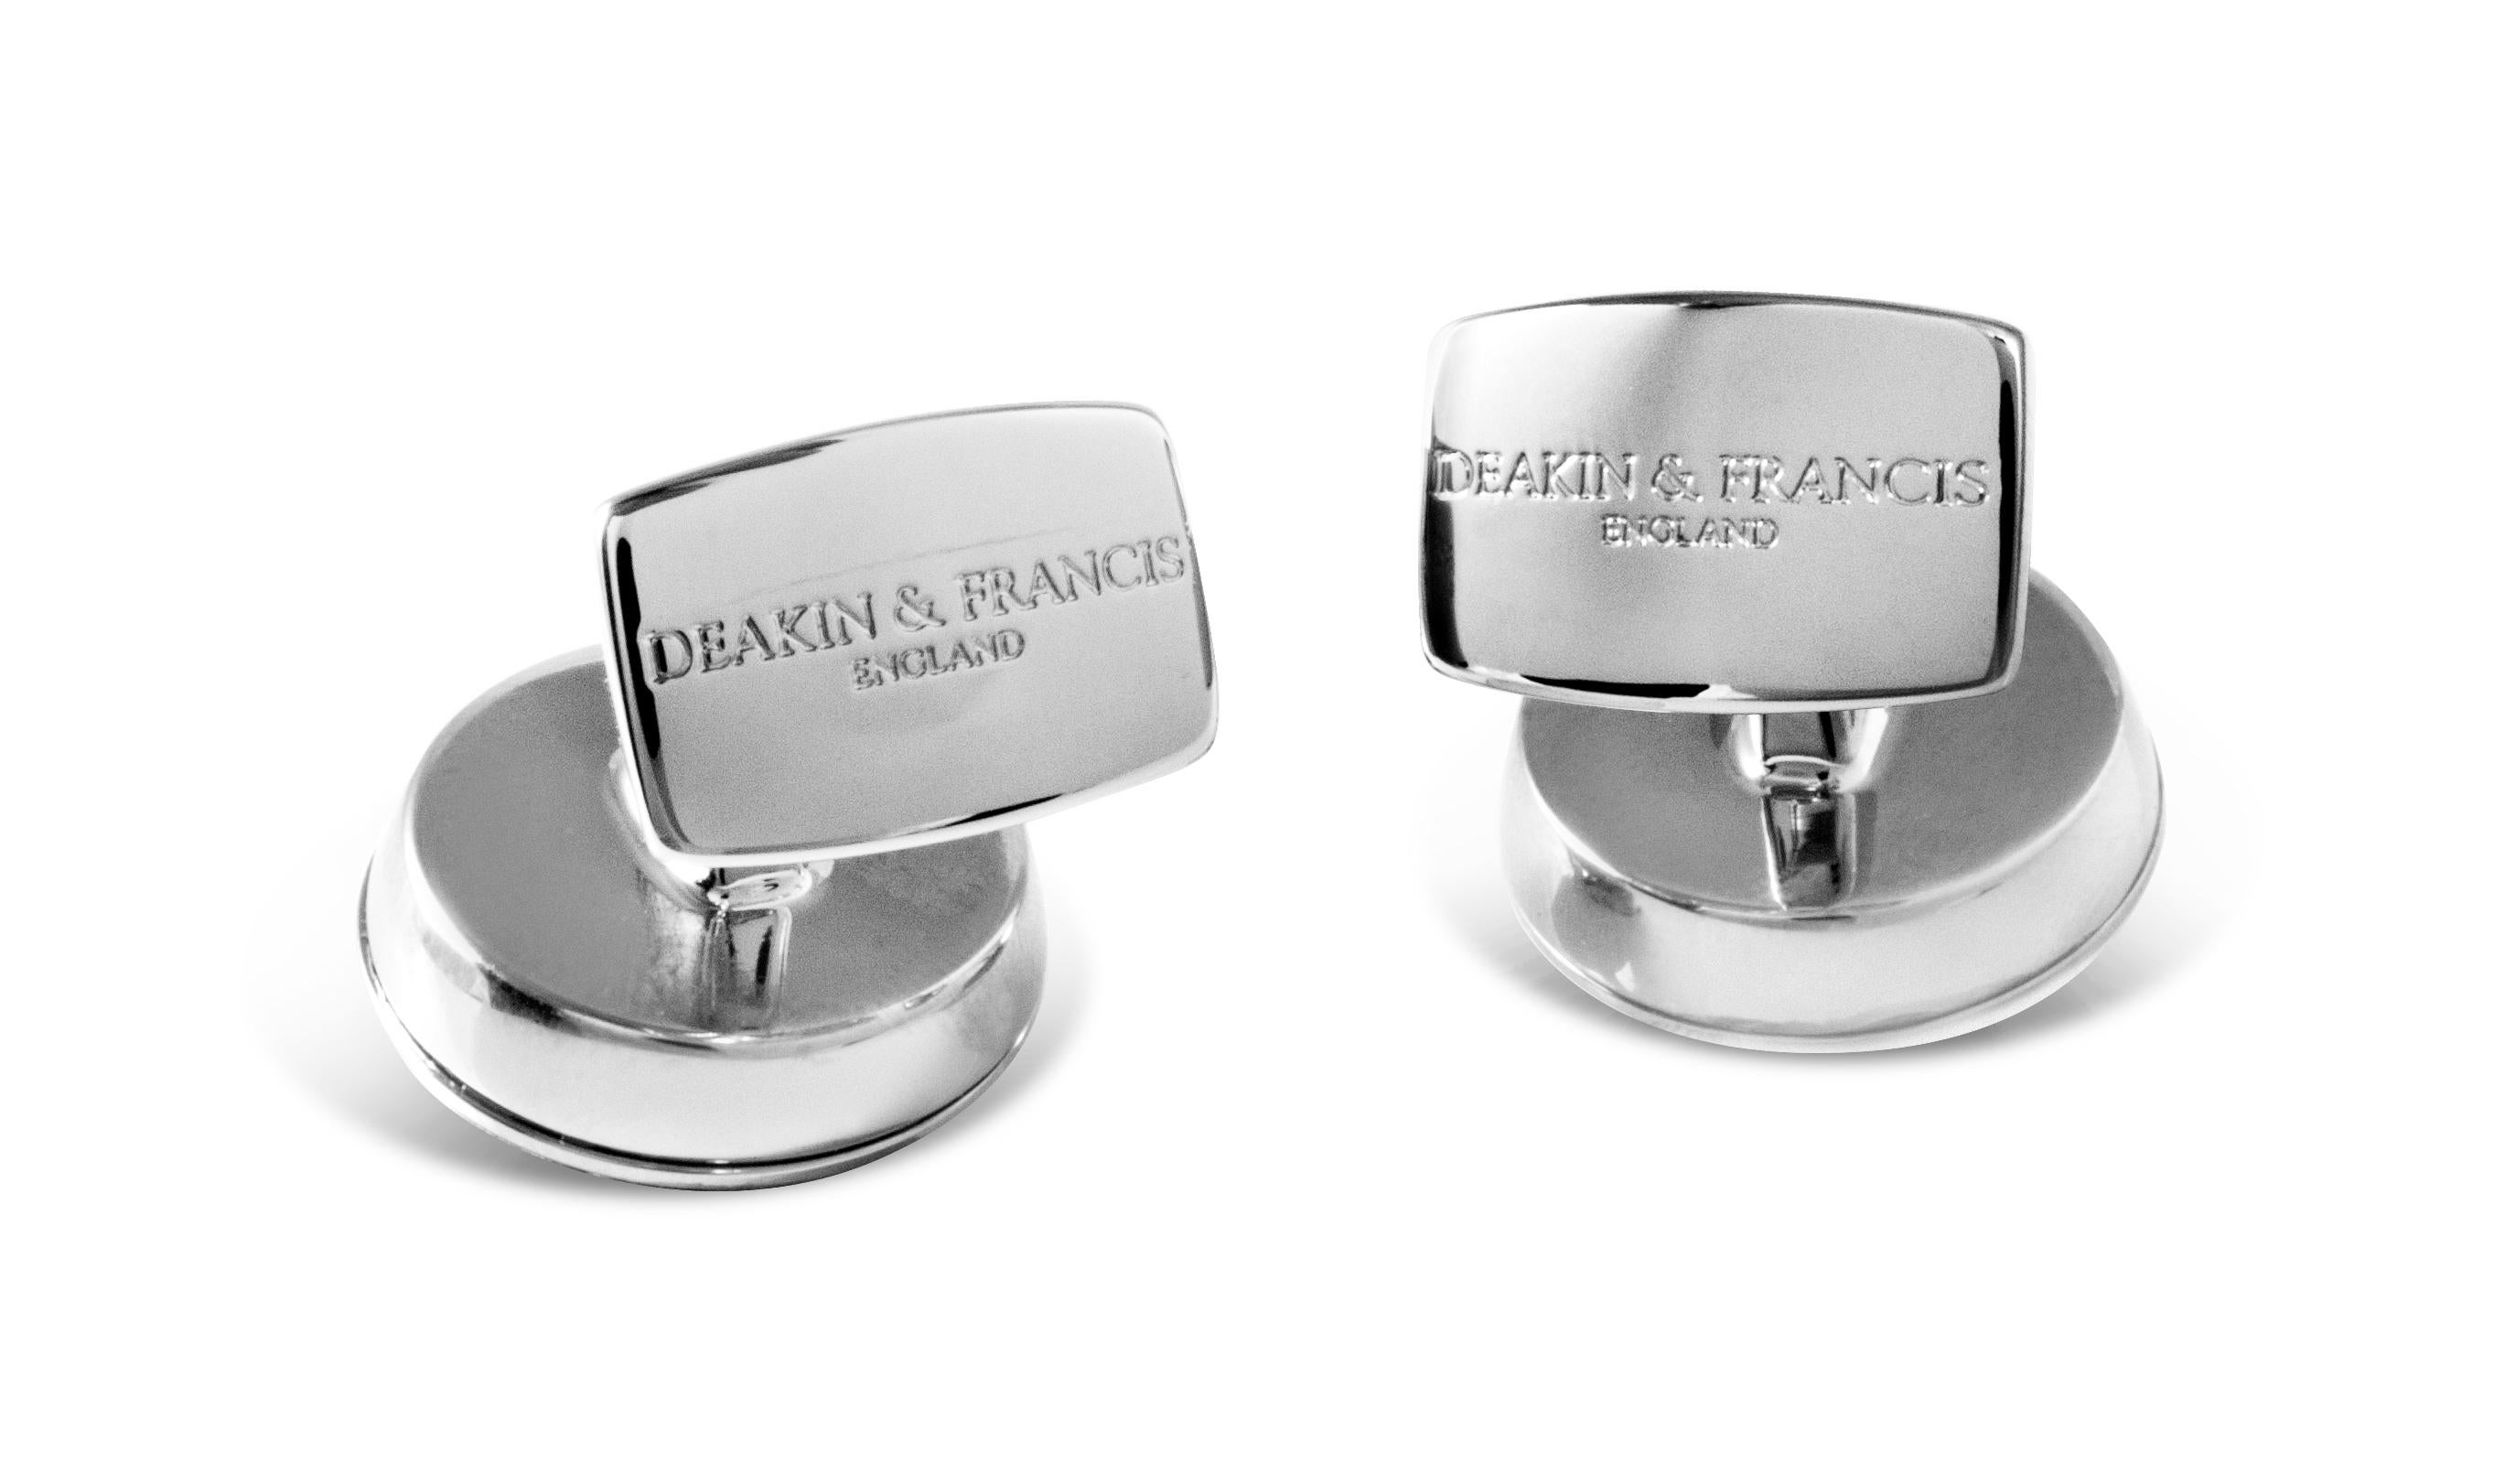 Contemporary Deakin & Francis Porthole Cufflinks With Fish Centre